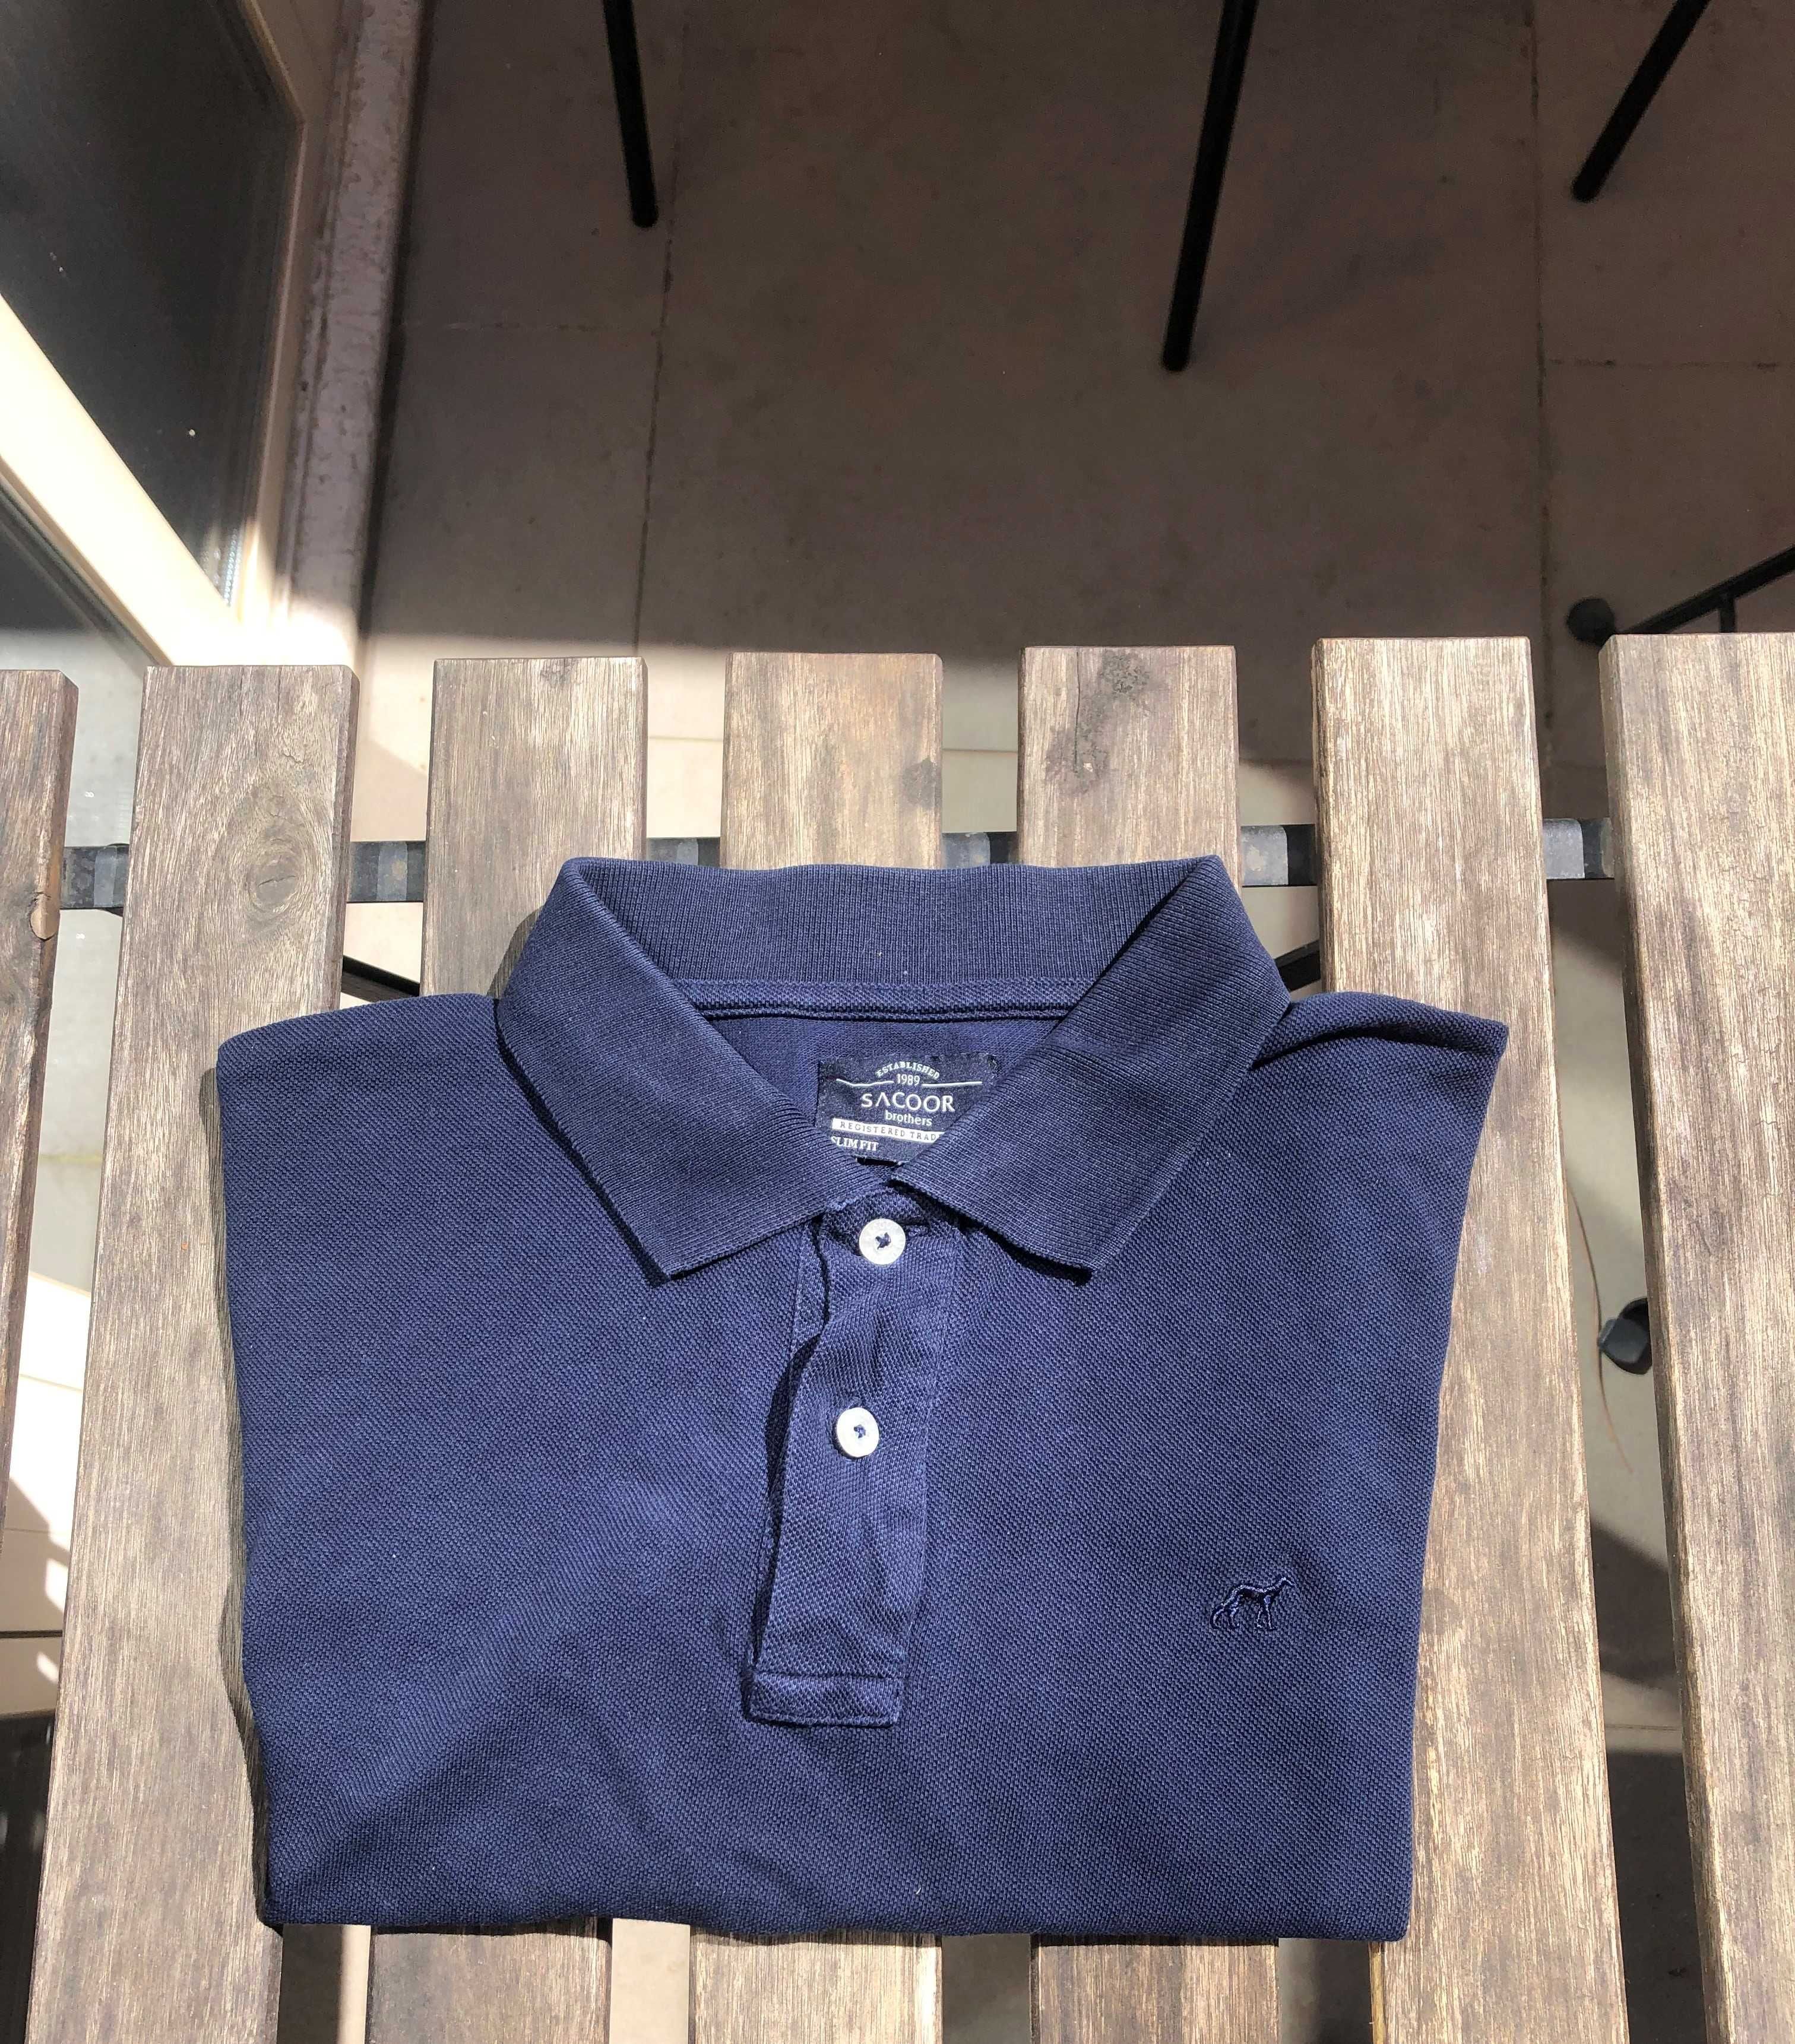 Sacoor SLIM FIT polo